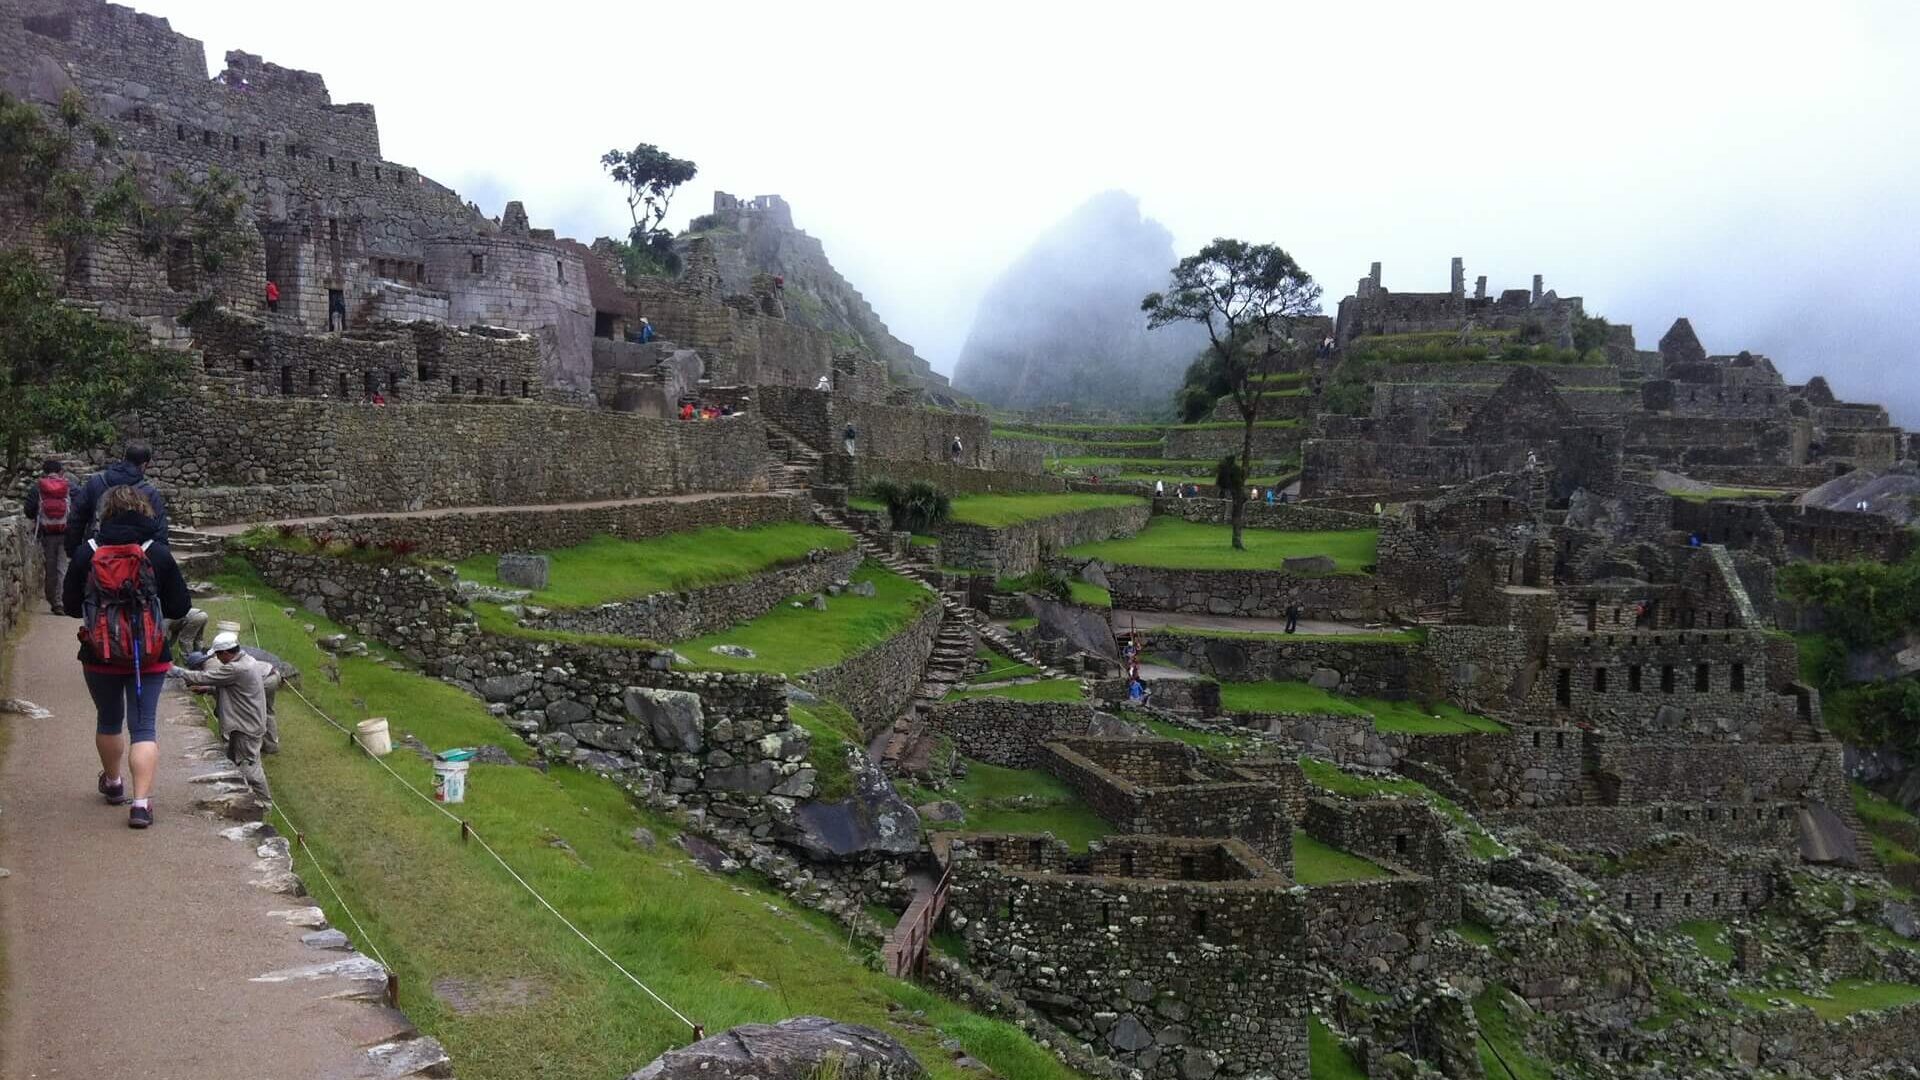 Arriving to Machu Picchu after hiking the Inca Trail with RESPONSible Travel Peru